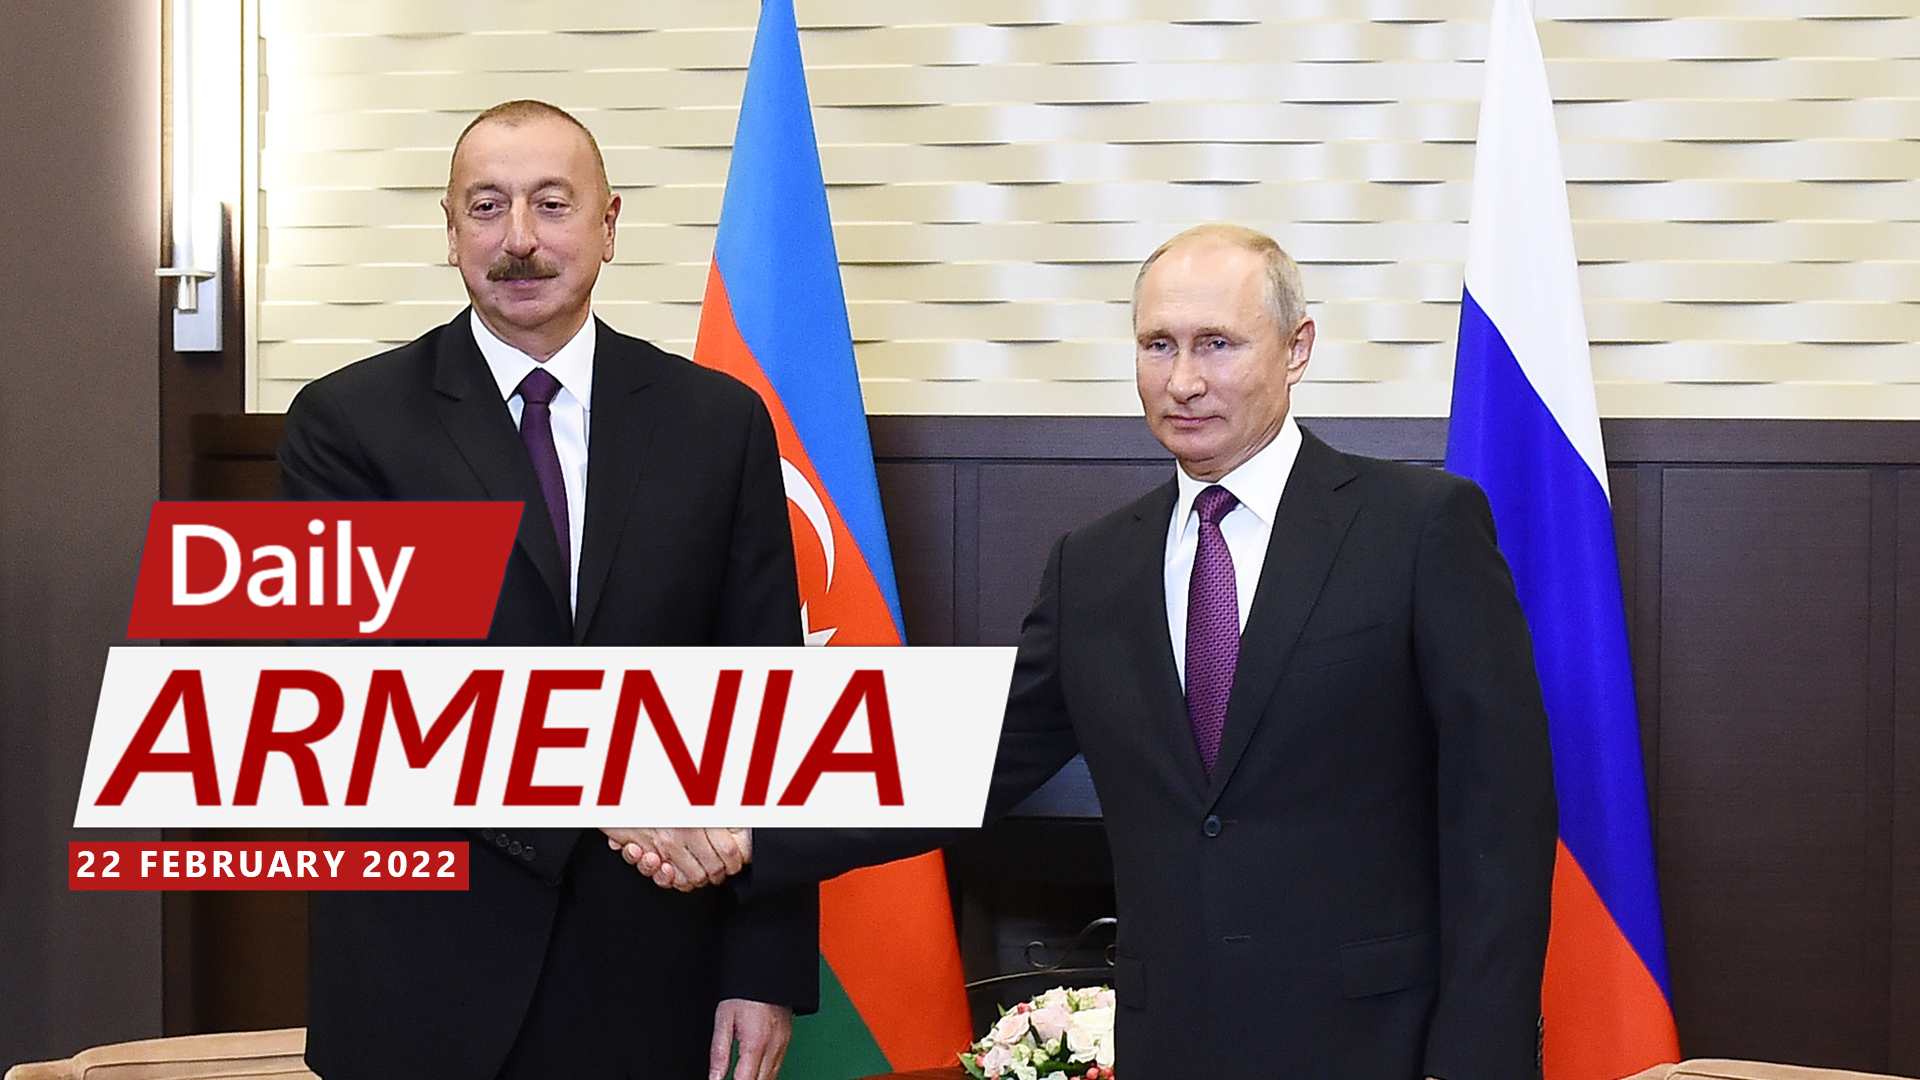 Putin and Aliyev raise relations to “allied level”